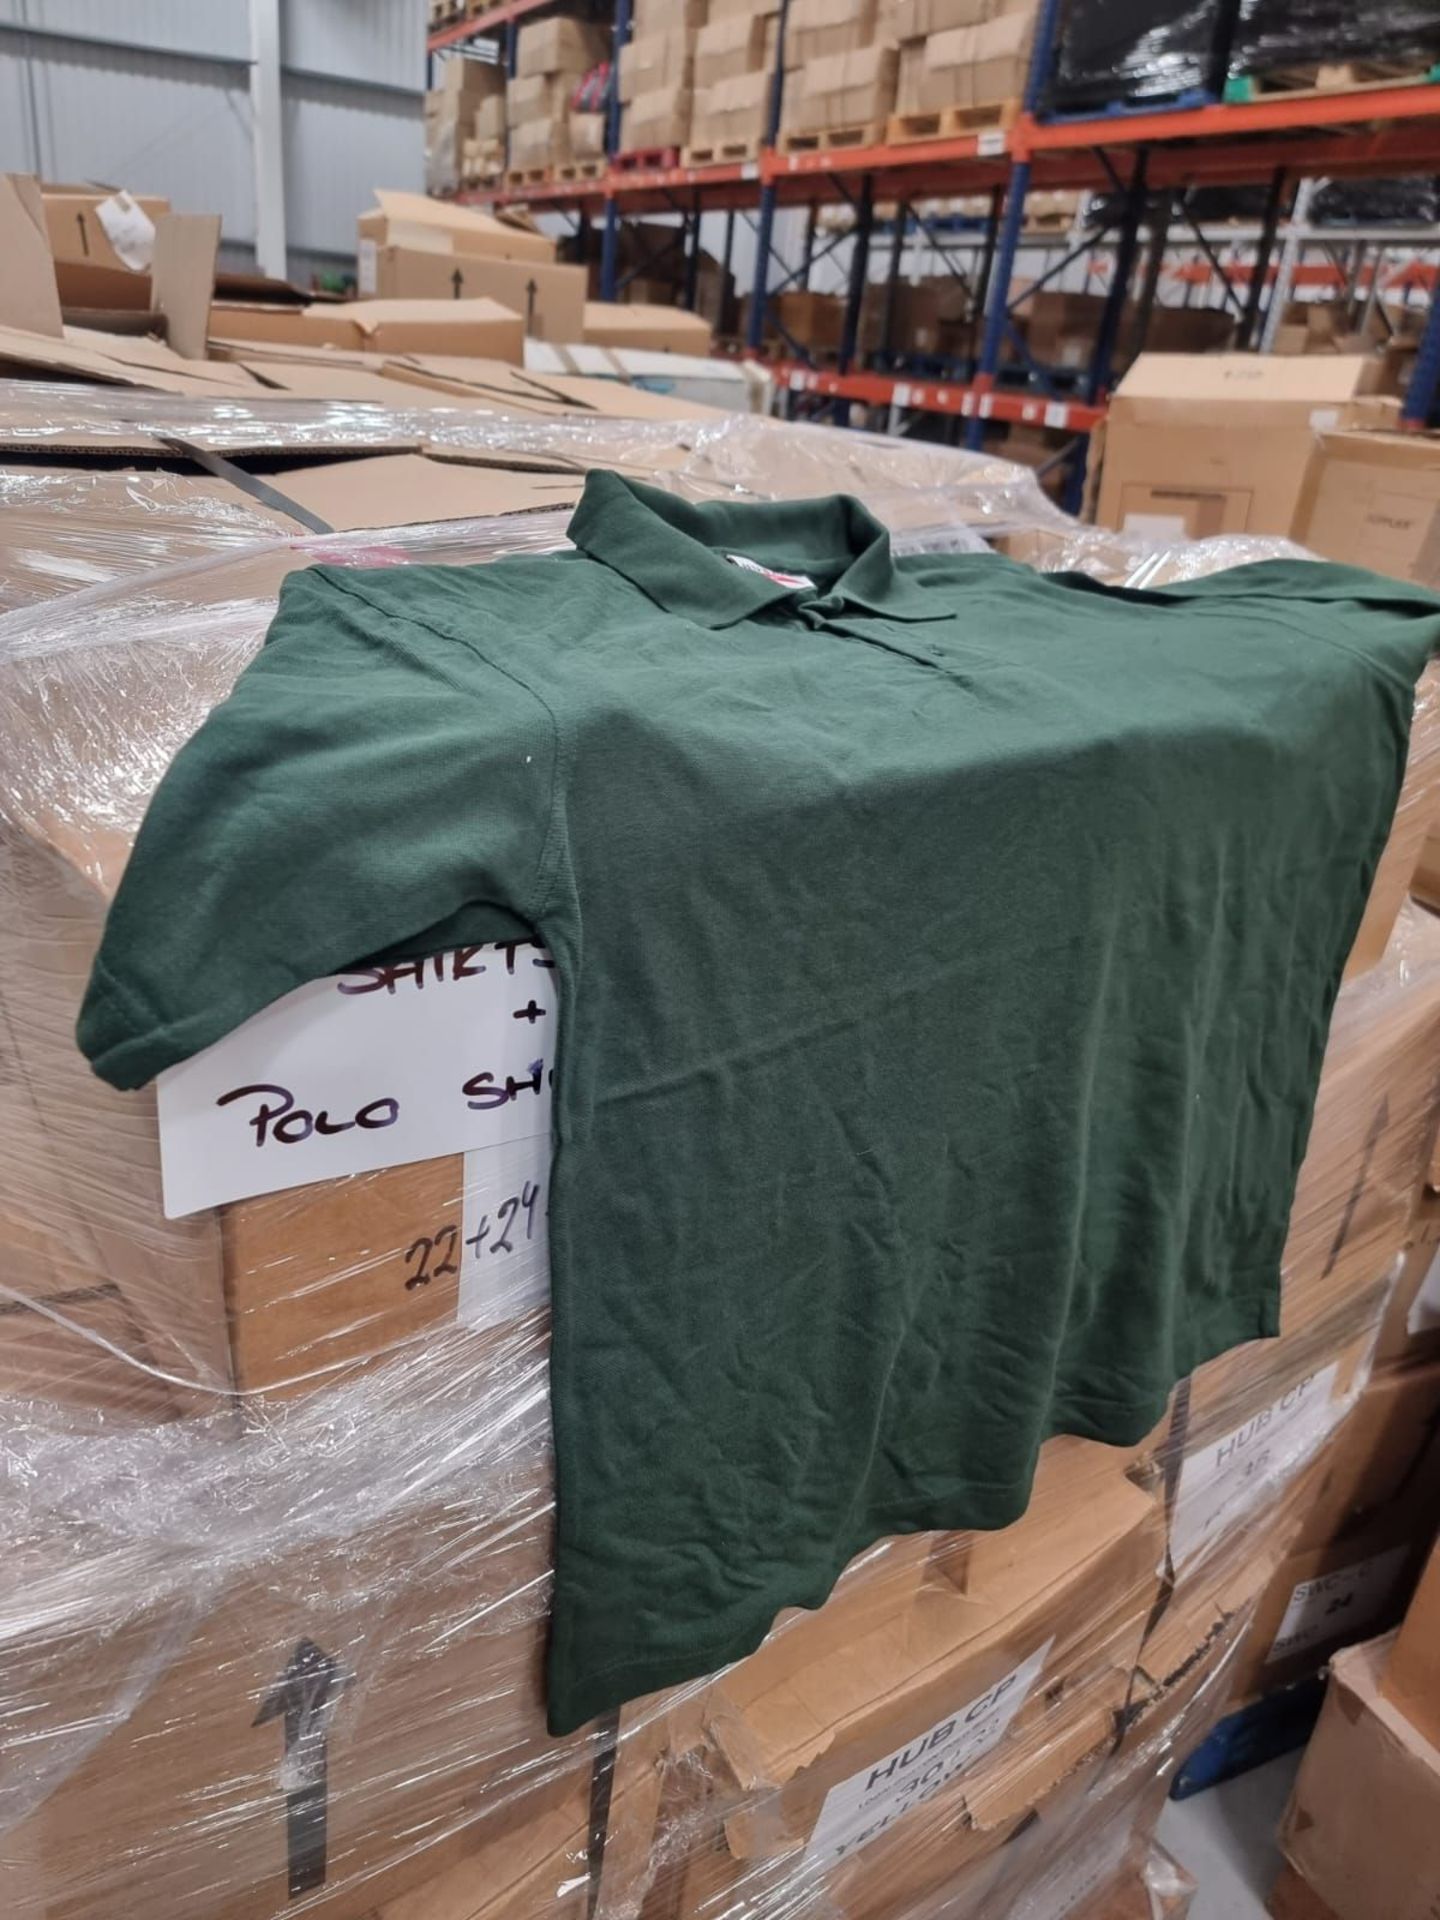 PALLET TO CONTAIN A LARGE QUANTITY OF NEW CLOTHING GOODS. MAY INCLUDE ITEMS SUCH AS: T-SHIRTS, - Image 26 of 28